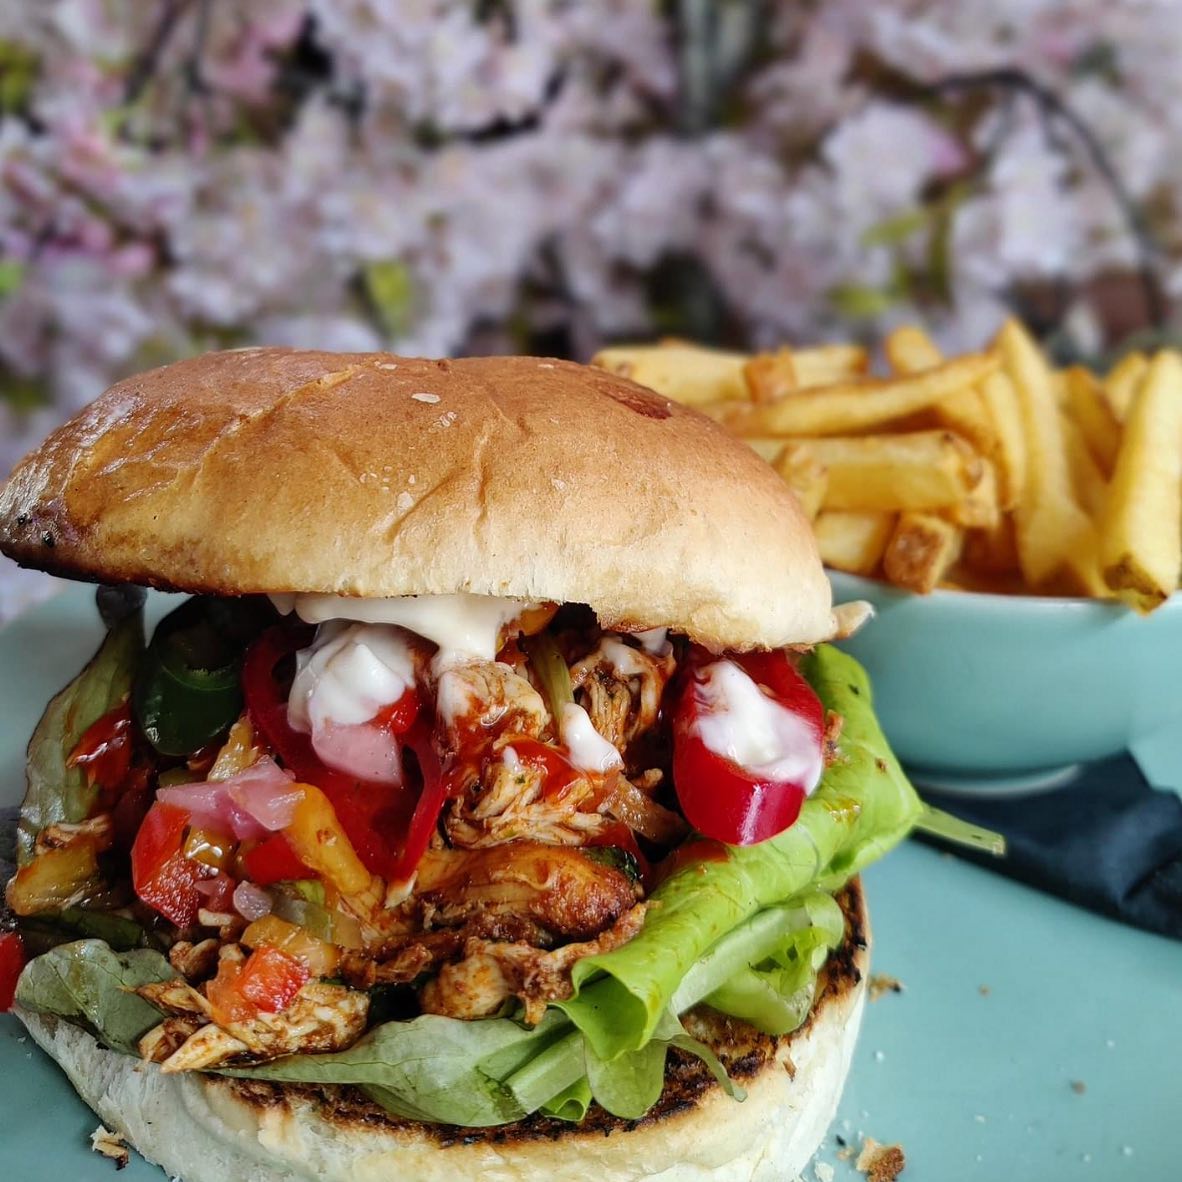 Todays mouth watering special 🤤HAPPY FRIDAY Welcome to the weekend the milky bars are on me.🤠Mexican Inspired Chicken burger Pulled chicken, lettuce , salsa, hot sauce with fresh chillies served in a brioche bun with a choice of side order. Food served from 12pm ‍